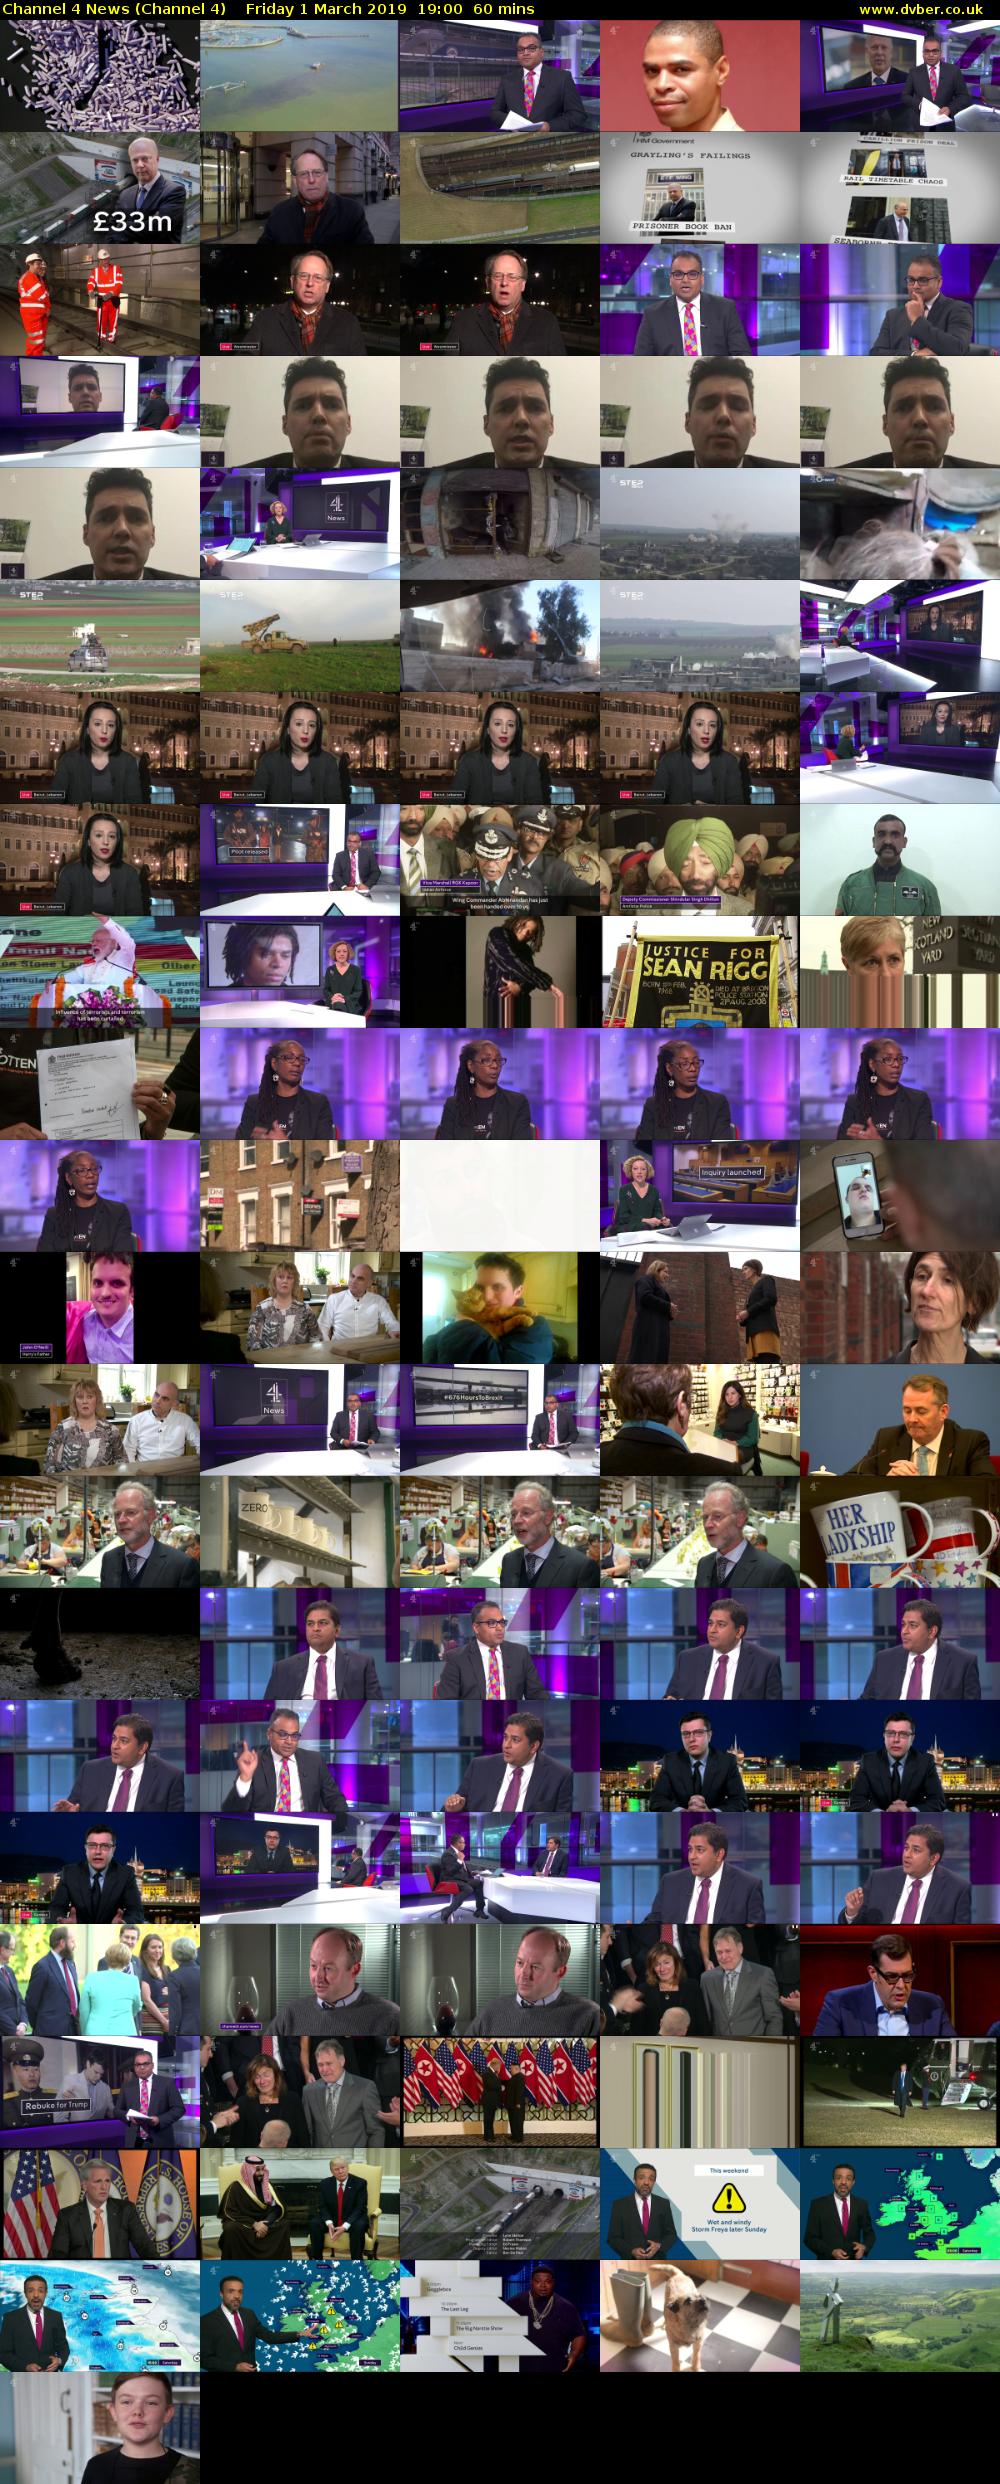 Channel 4 News (Channel 4) Friday 1 March 2019 19:00 - 20:00